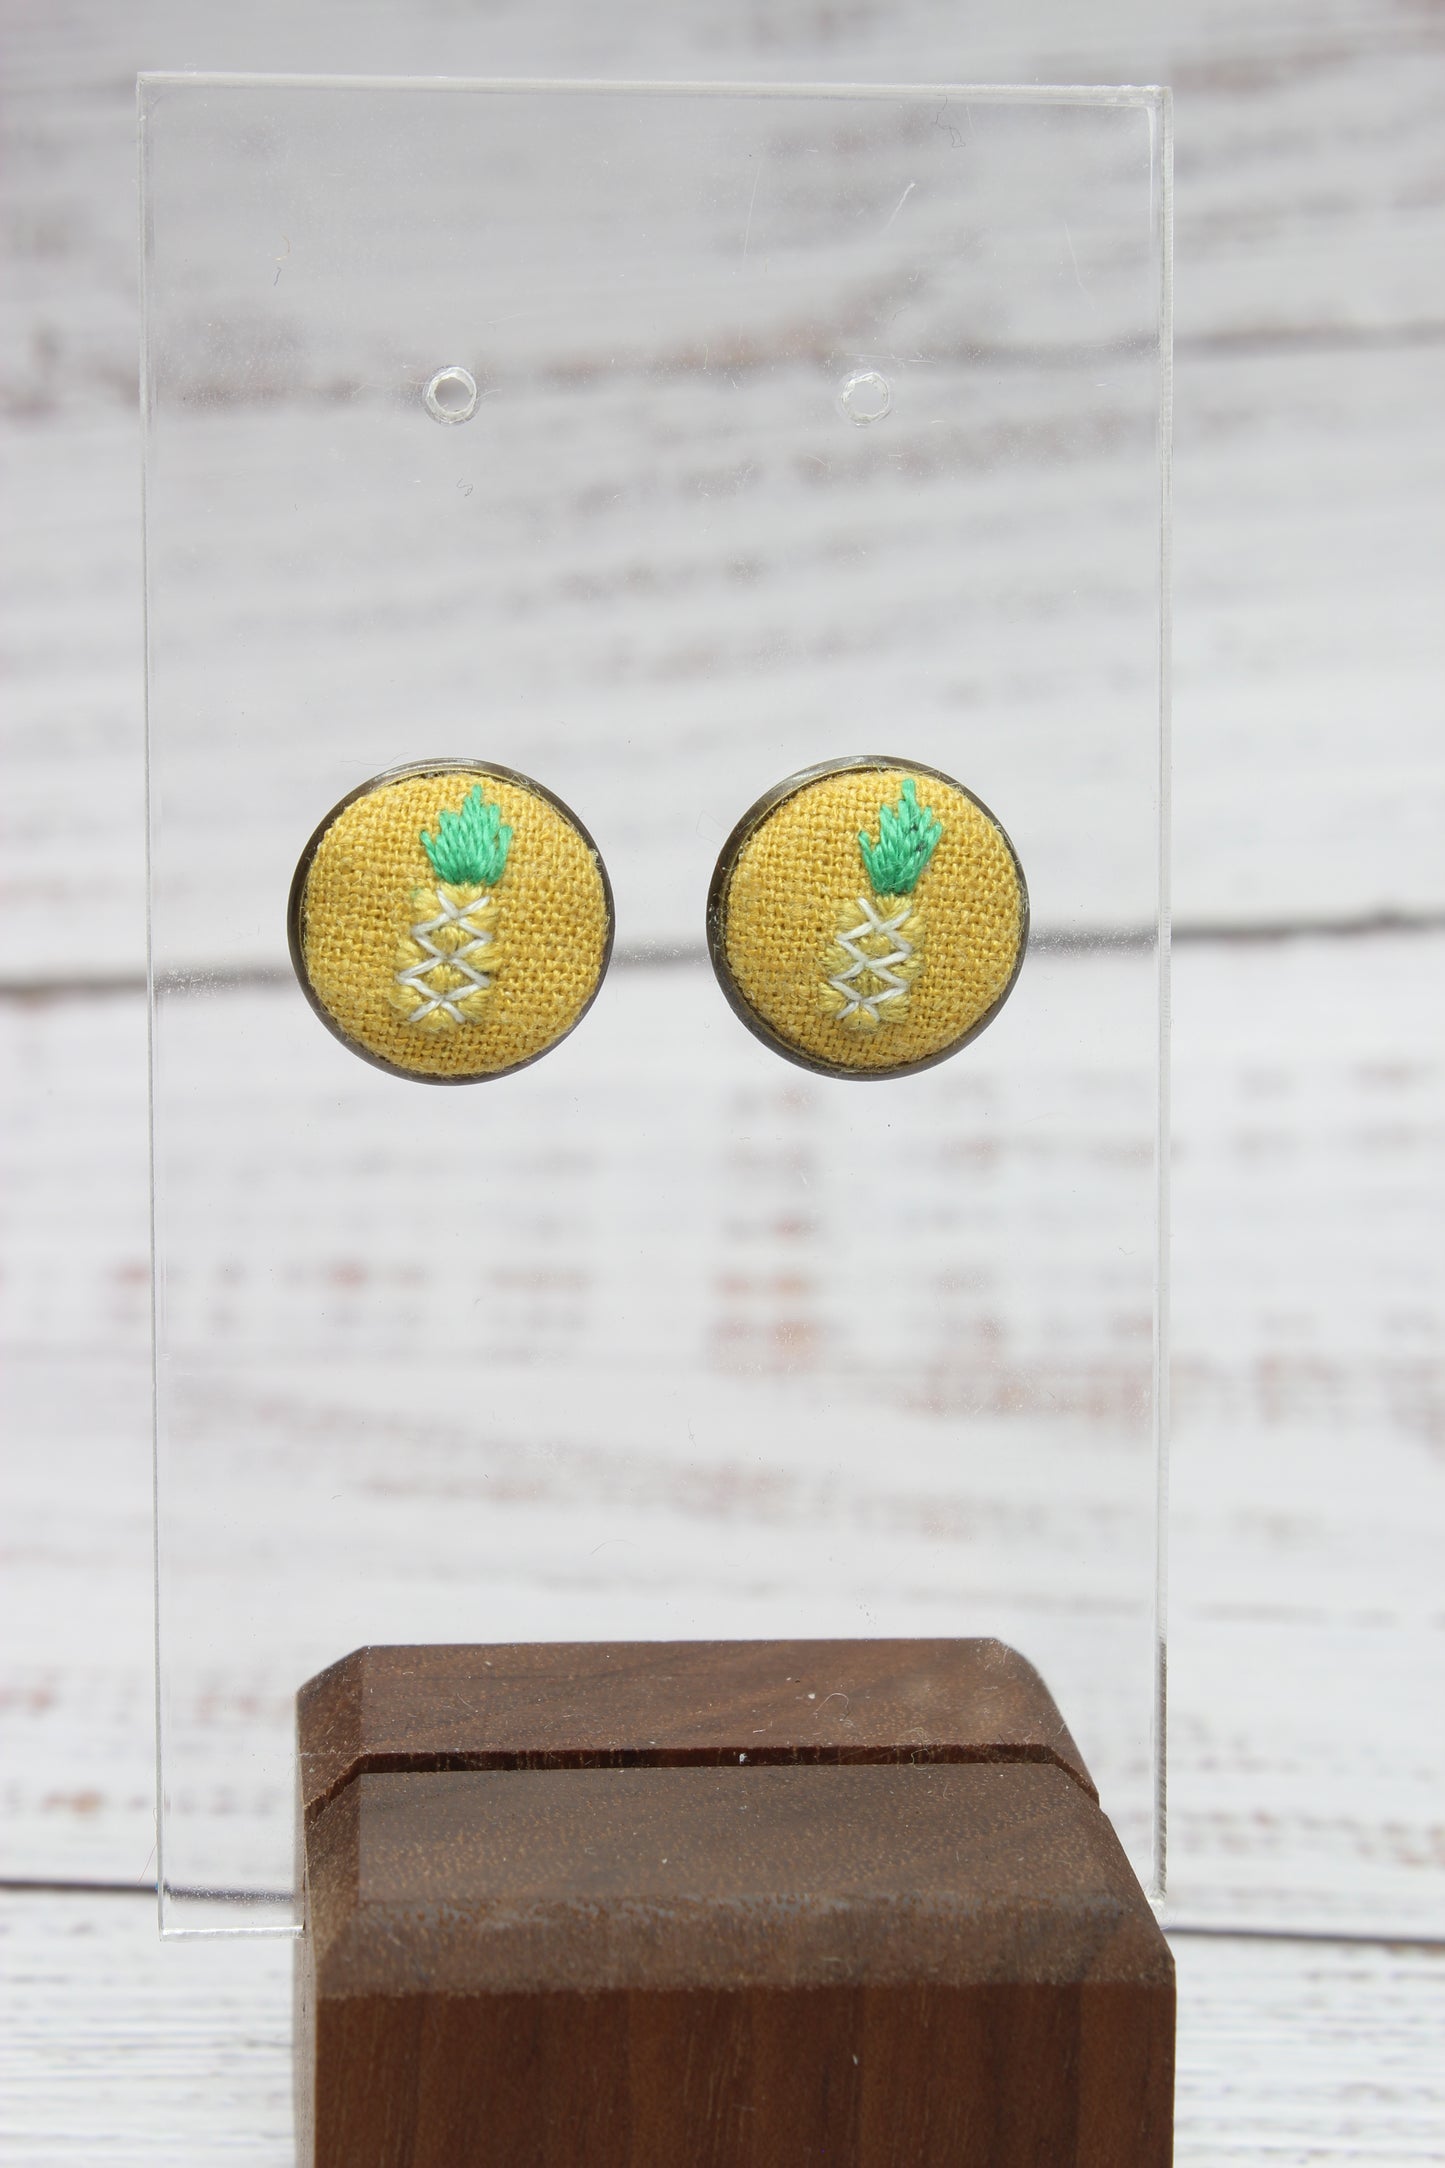 Embroidery Pineapple Studs Earrings